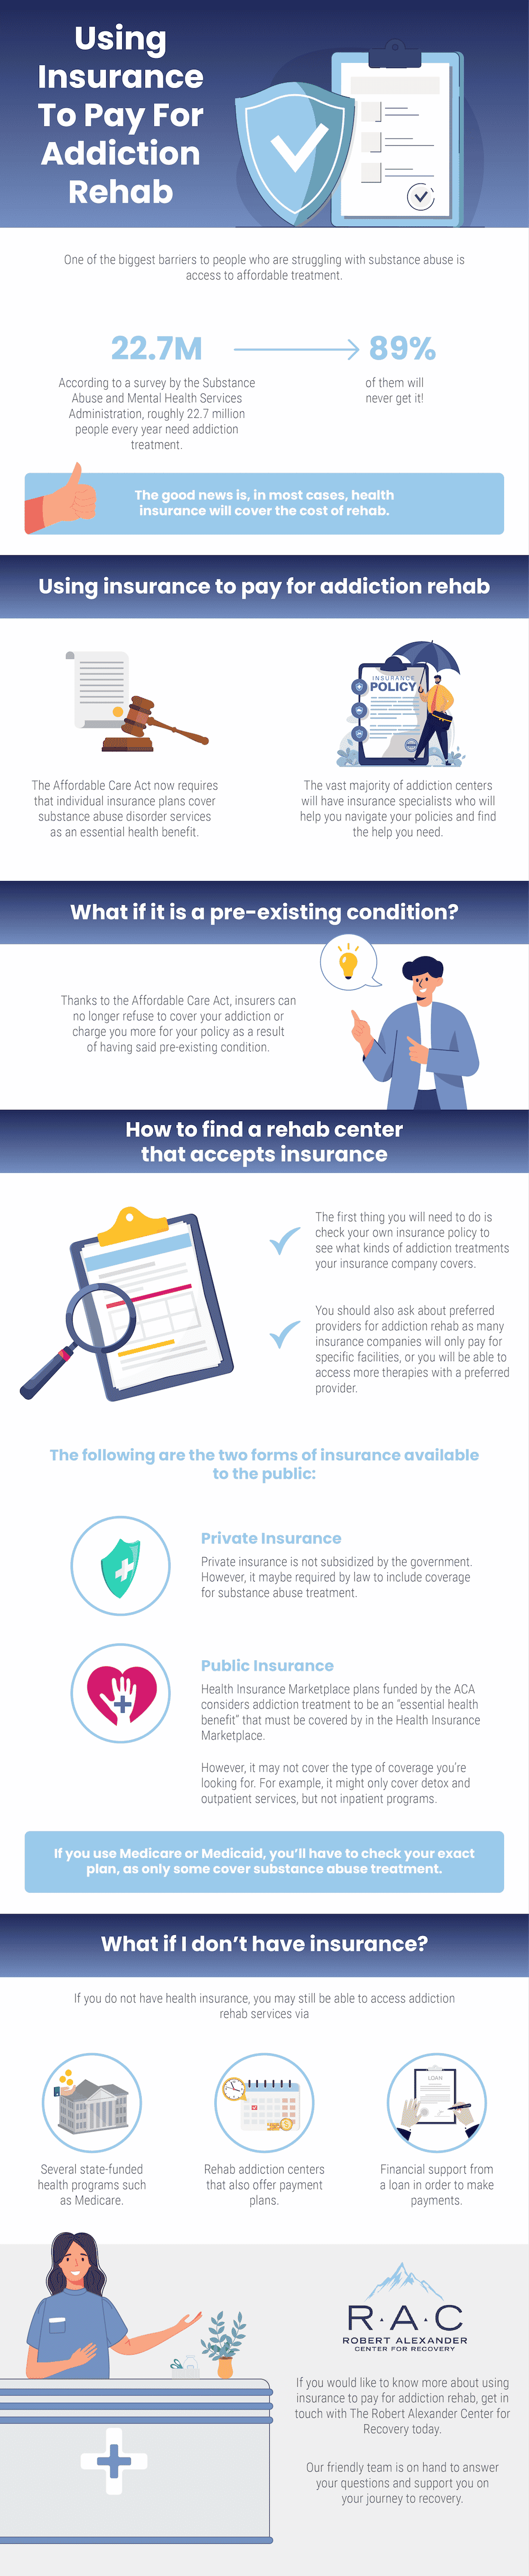 Using Insurance To Pay For Addiction Rehab - Infographic